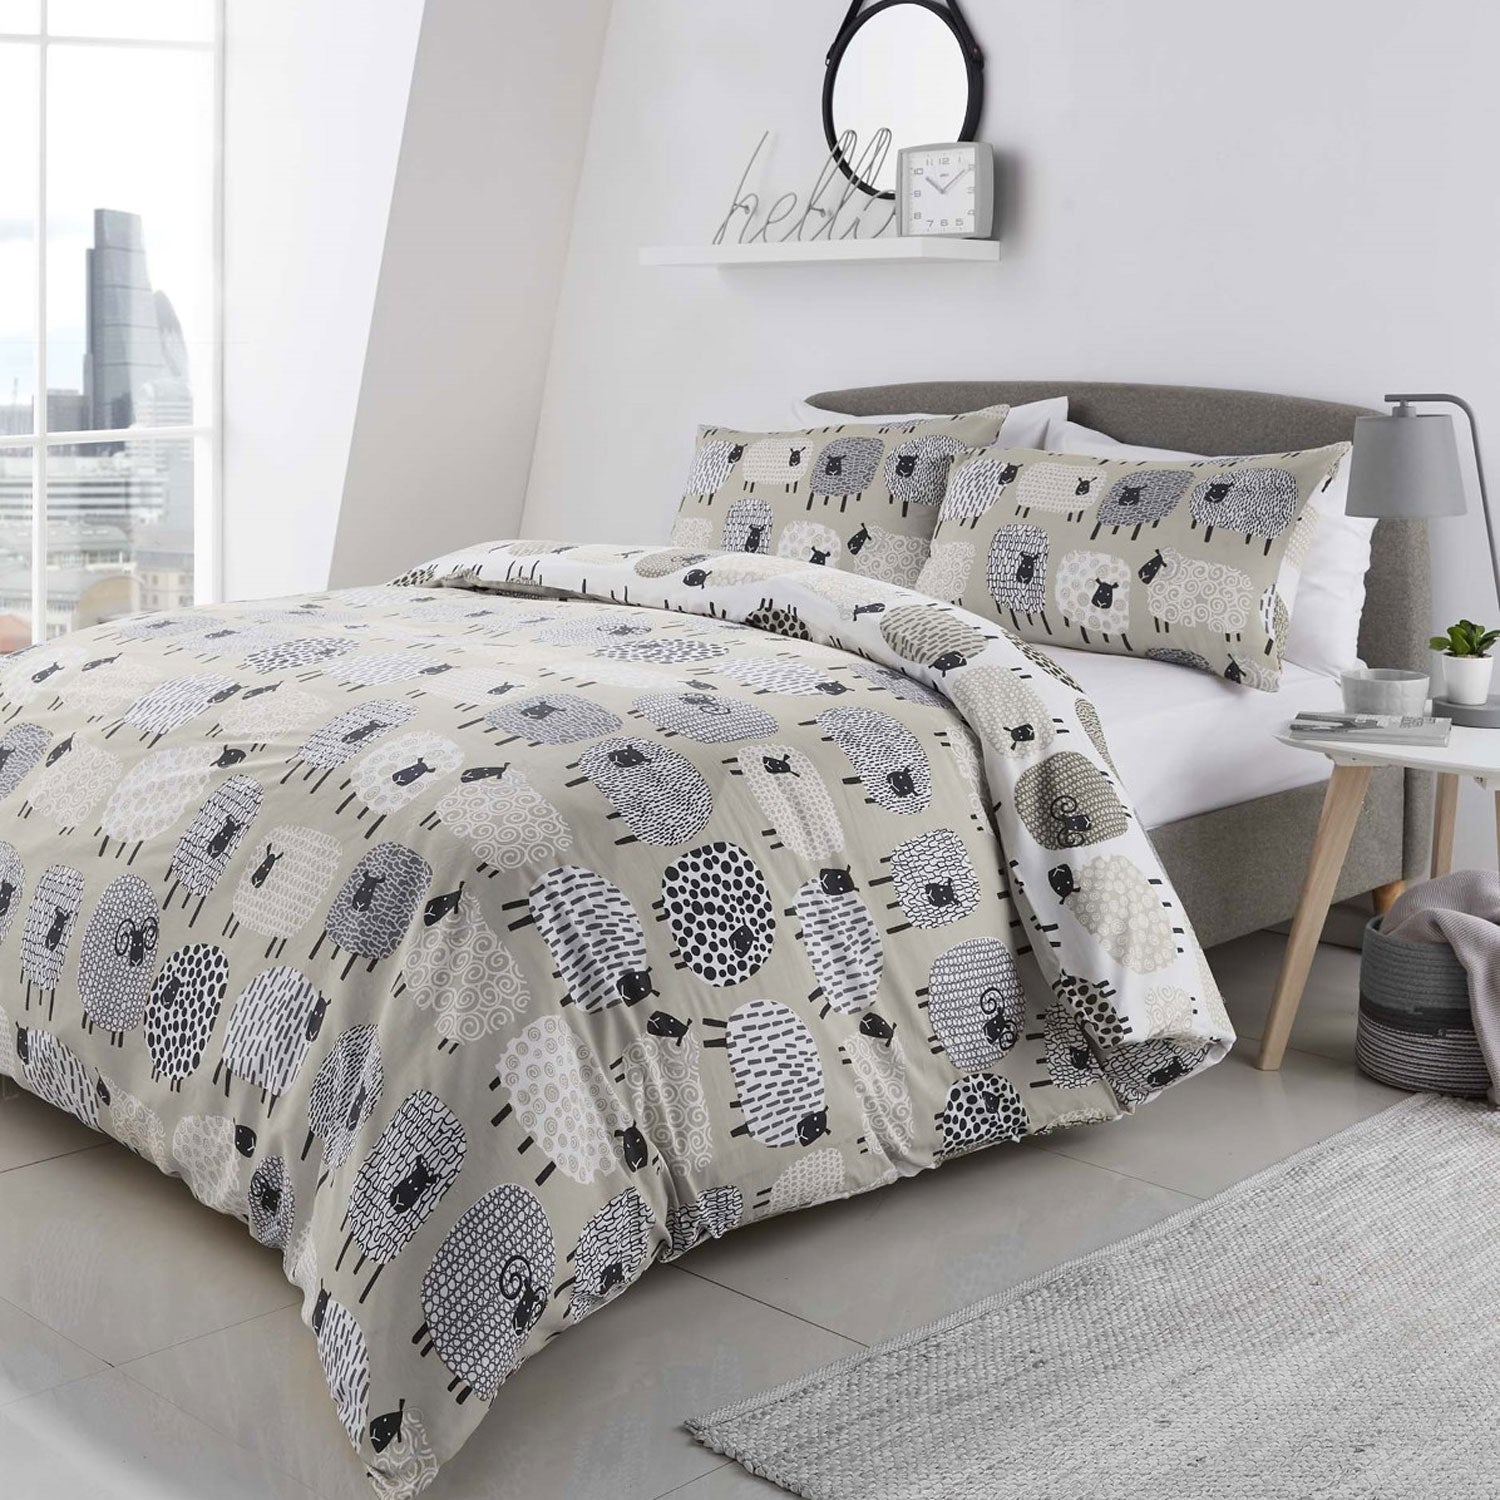  Fusion Dotty Sheep Duvet Cover Set 1 Shaws Department Stores